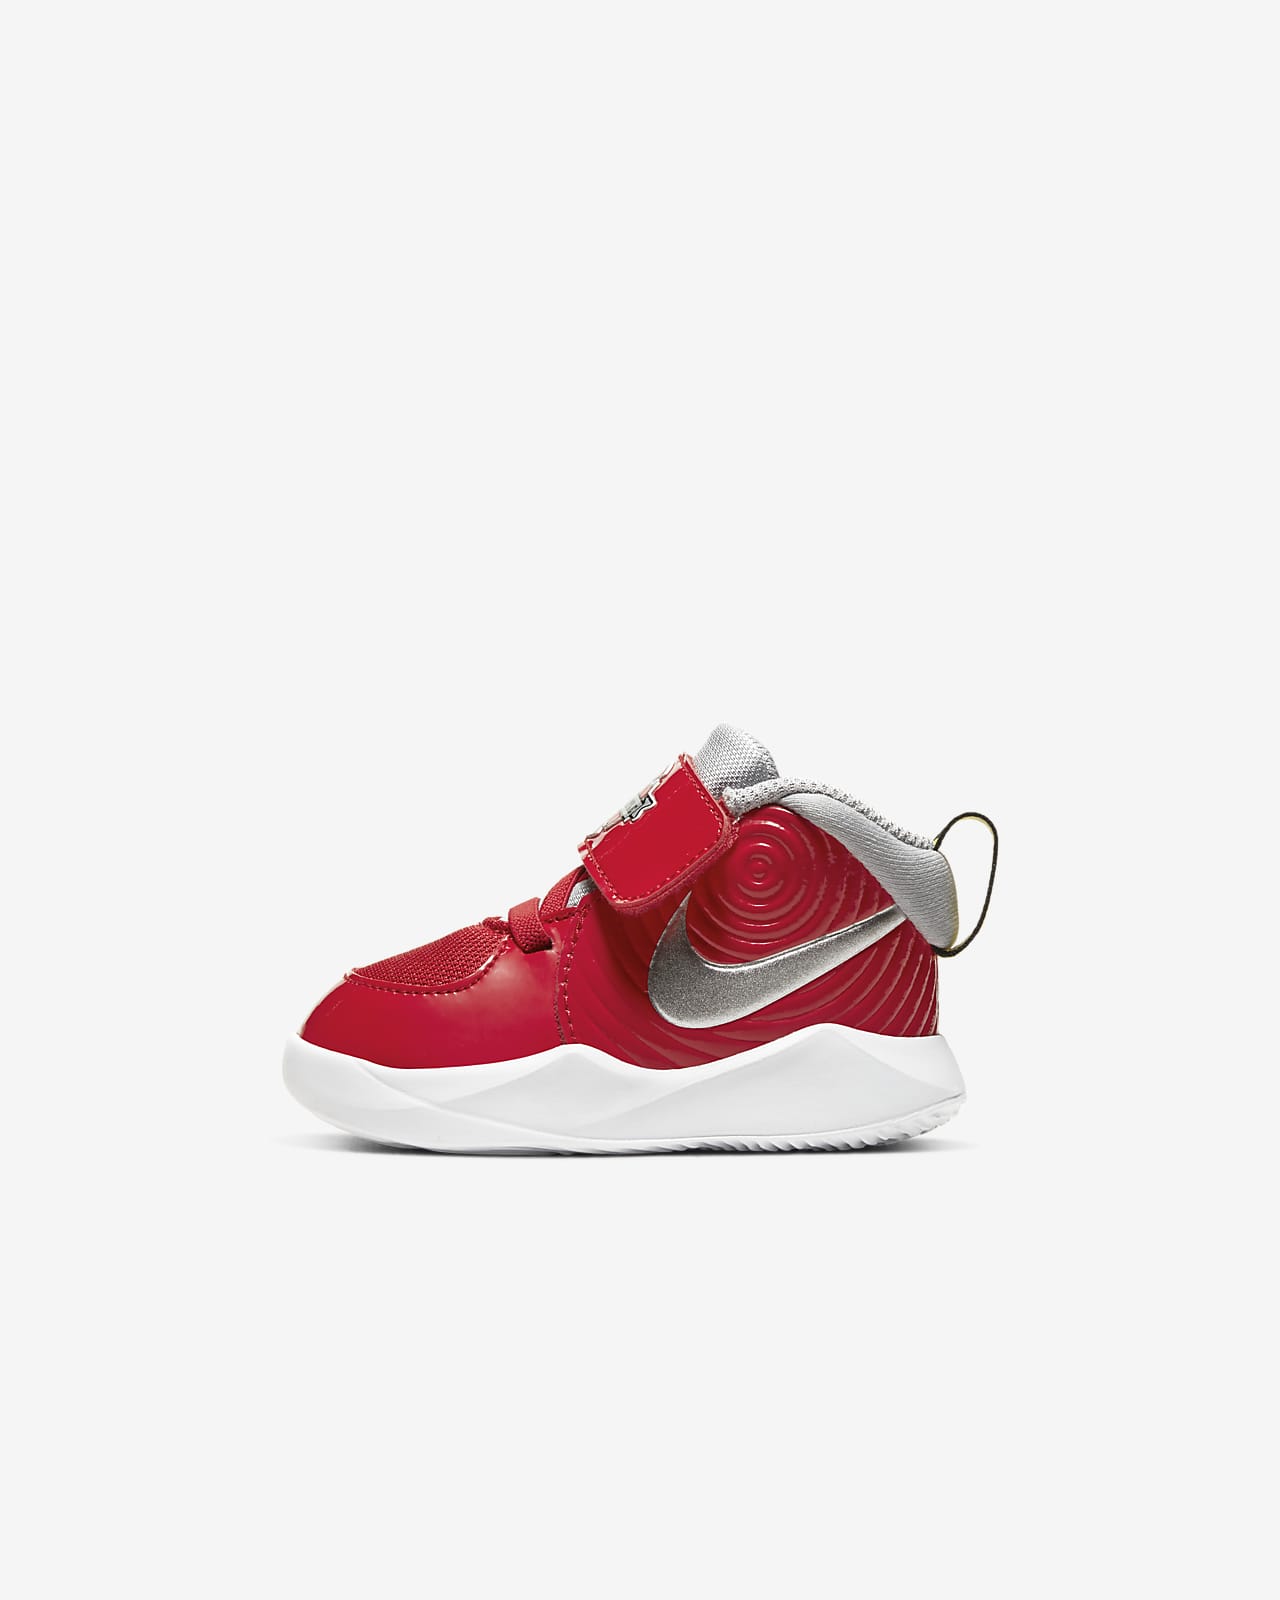 Nike Team Hustle D 9 Auto Baby/Toddler 